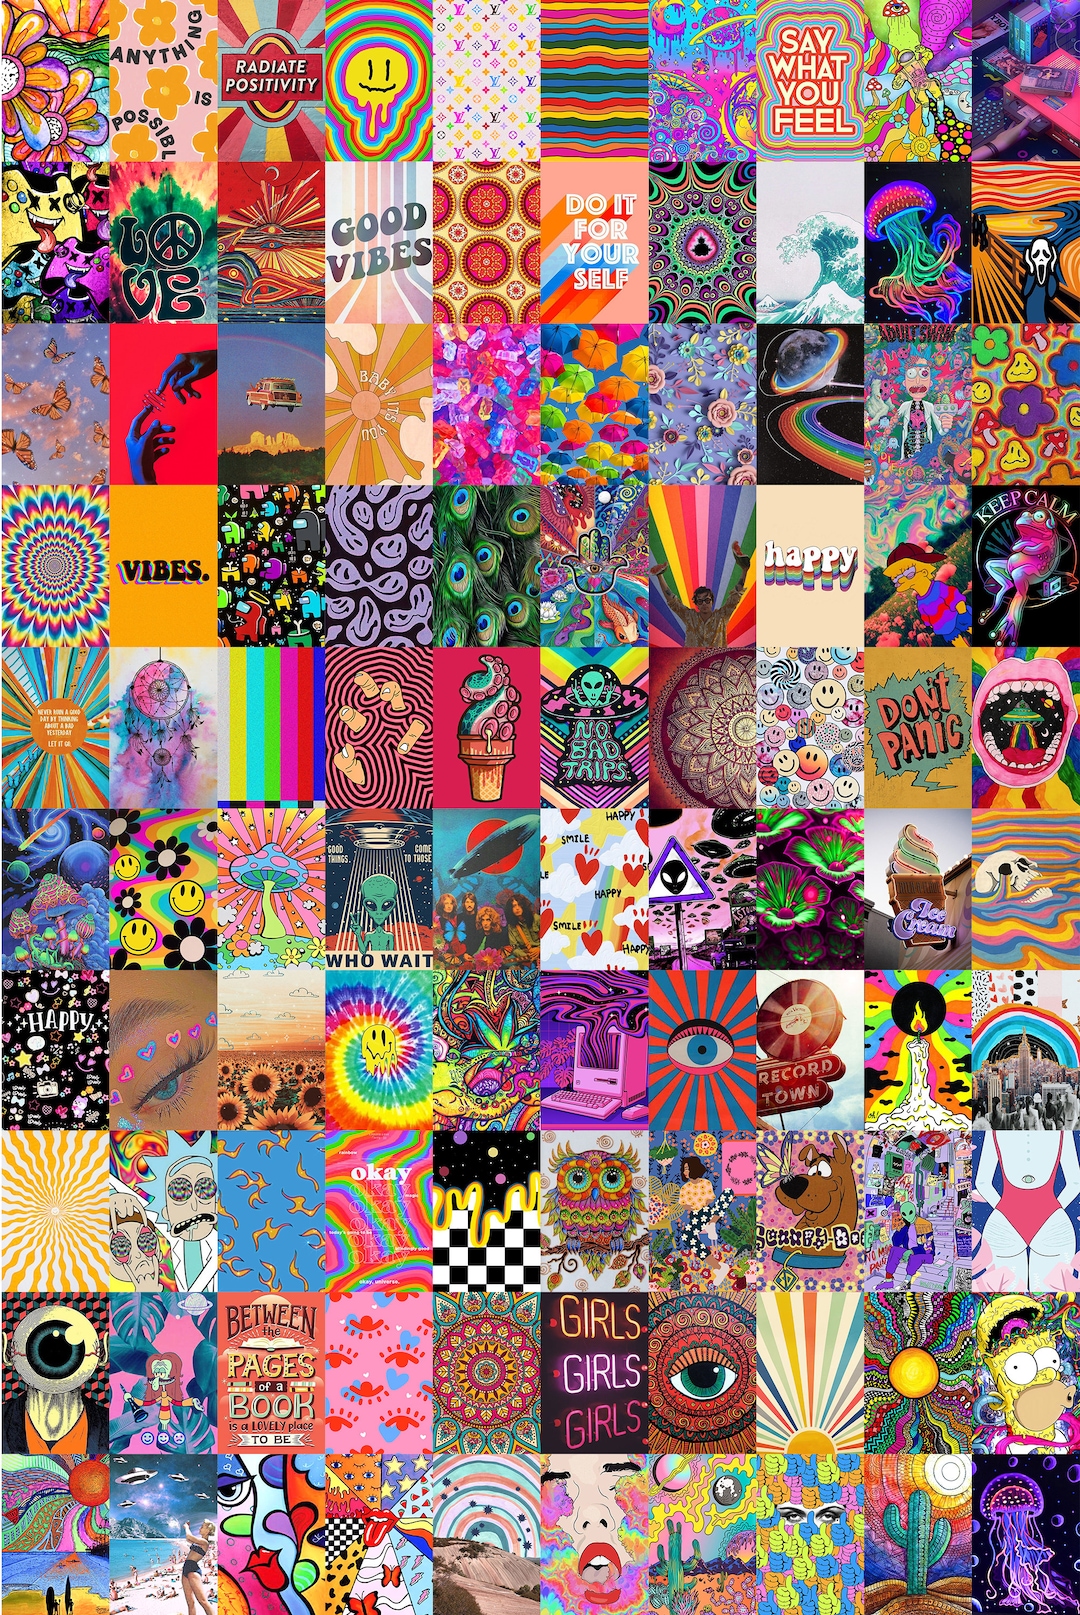 100 Pcs Trippy Hippy Photo Wall Collage Kit digital Download - Etsy